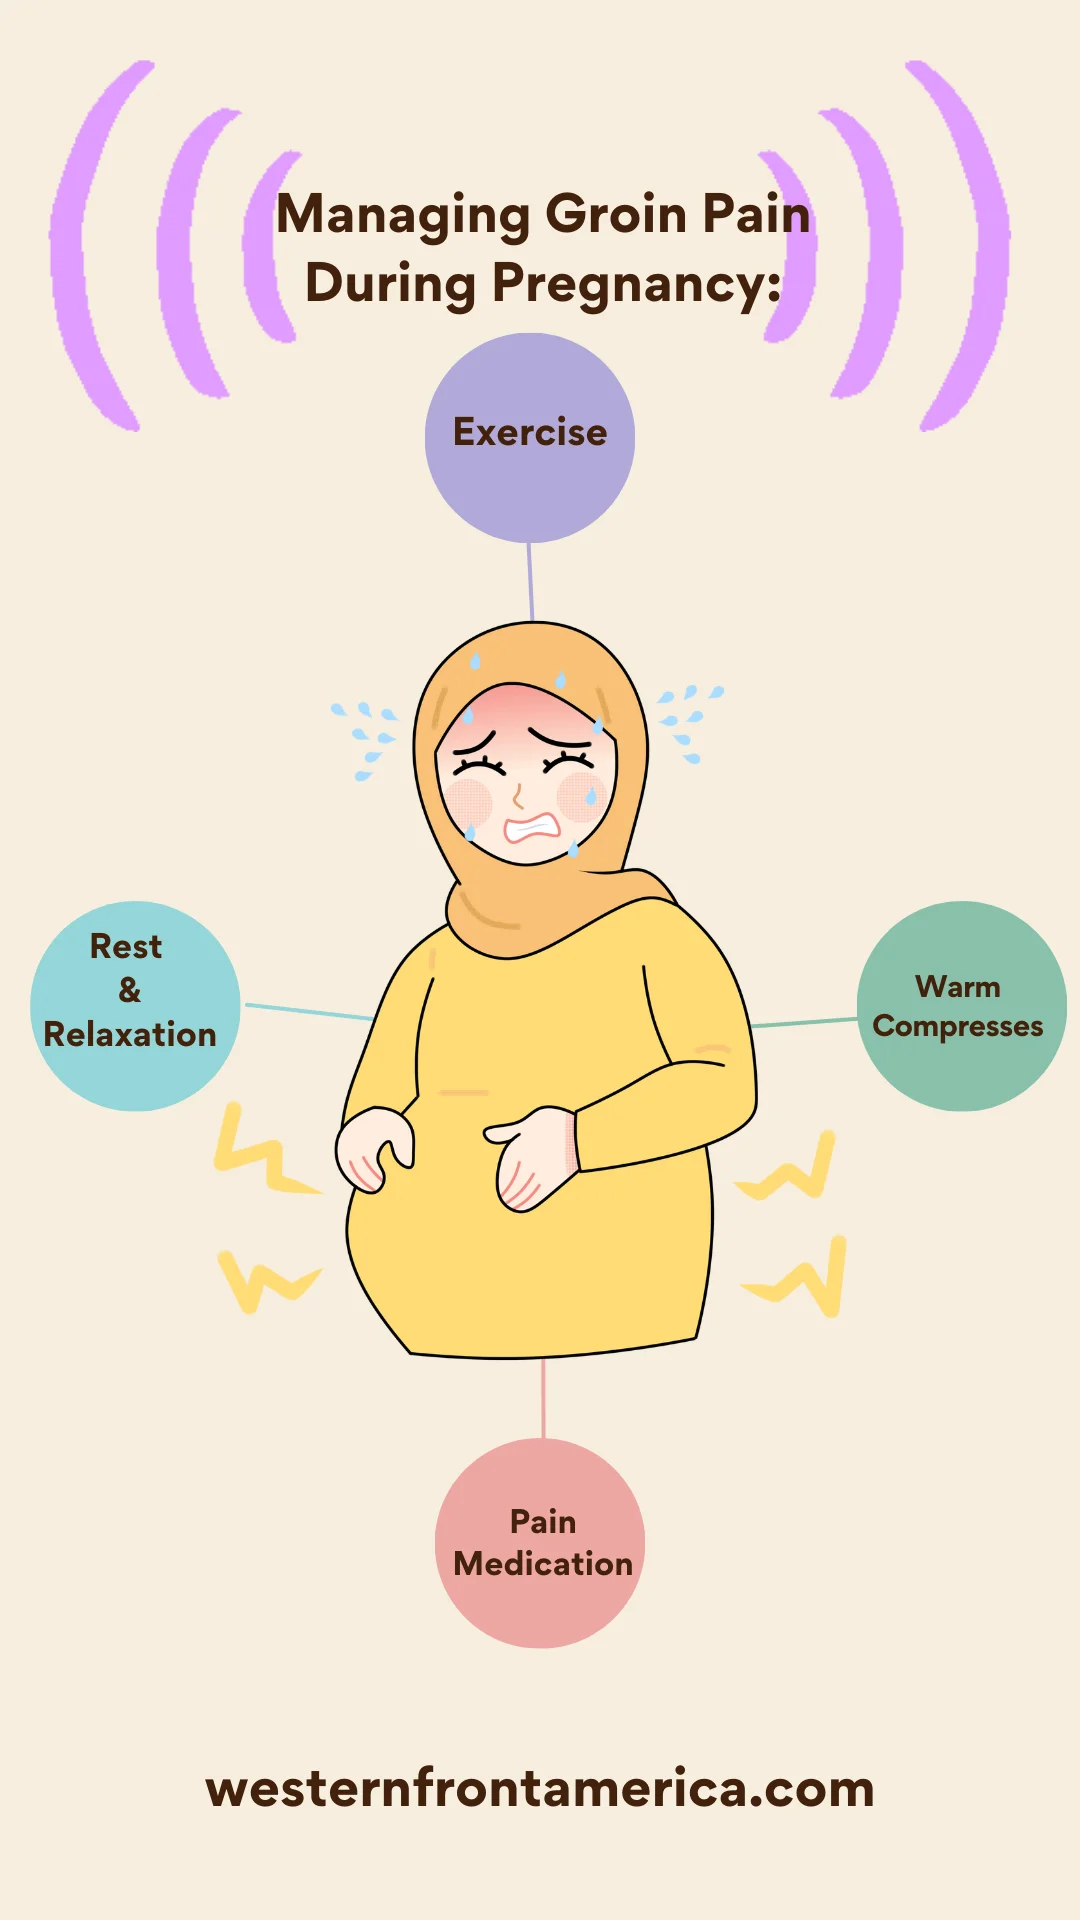 Managing Groin Pain During Pregnancy